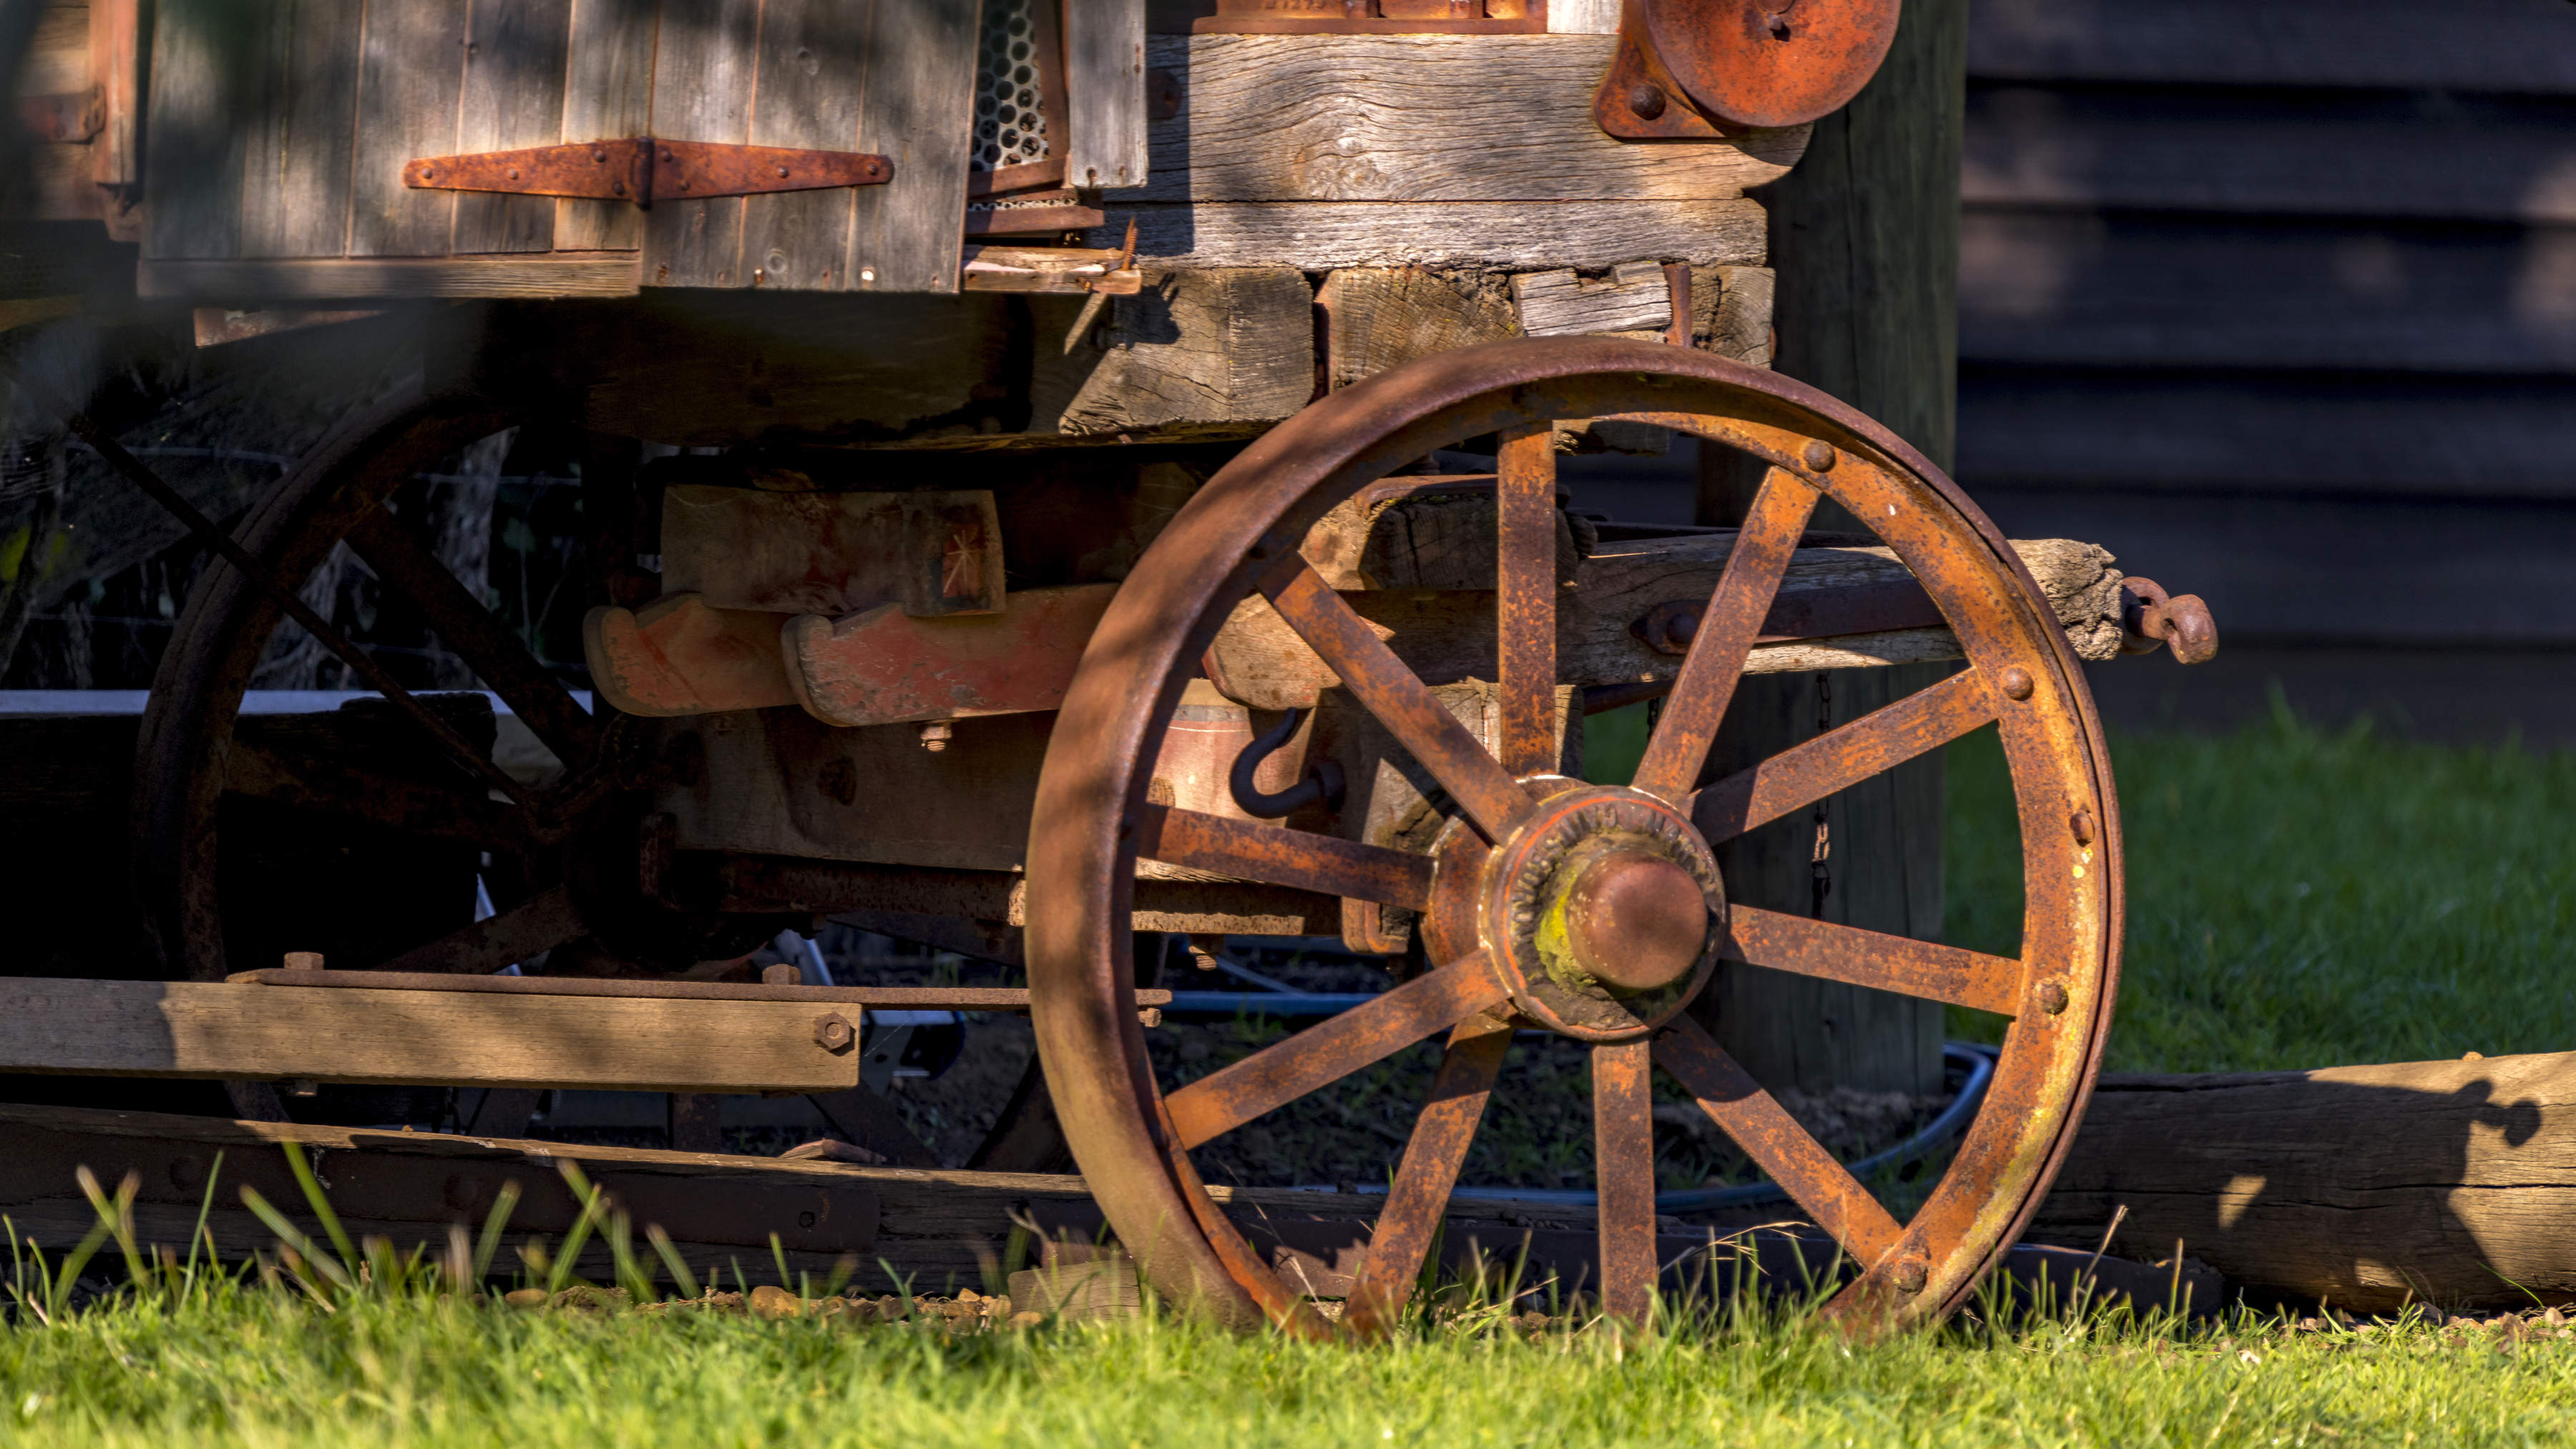 A steel spoked wheel and timber panelling are part of a Threshing machine that was used for harvesting grain. Circa 1900. Photo: Rob Burnett.